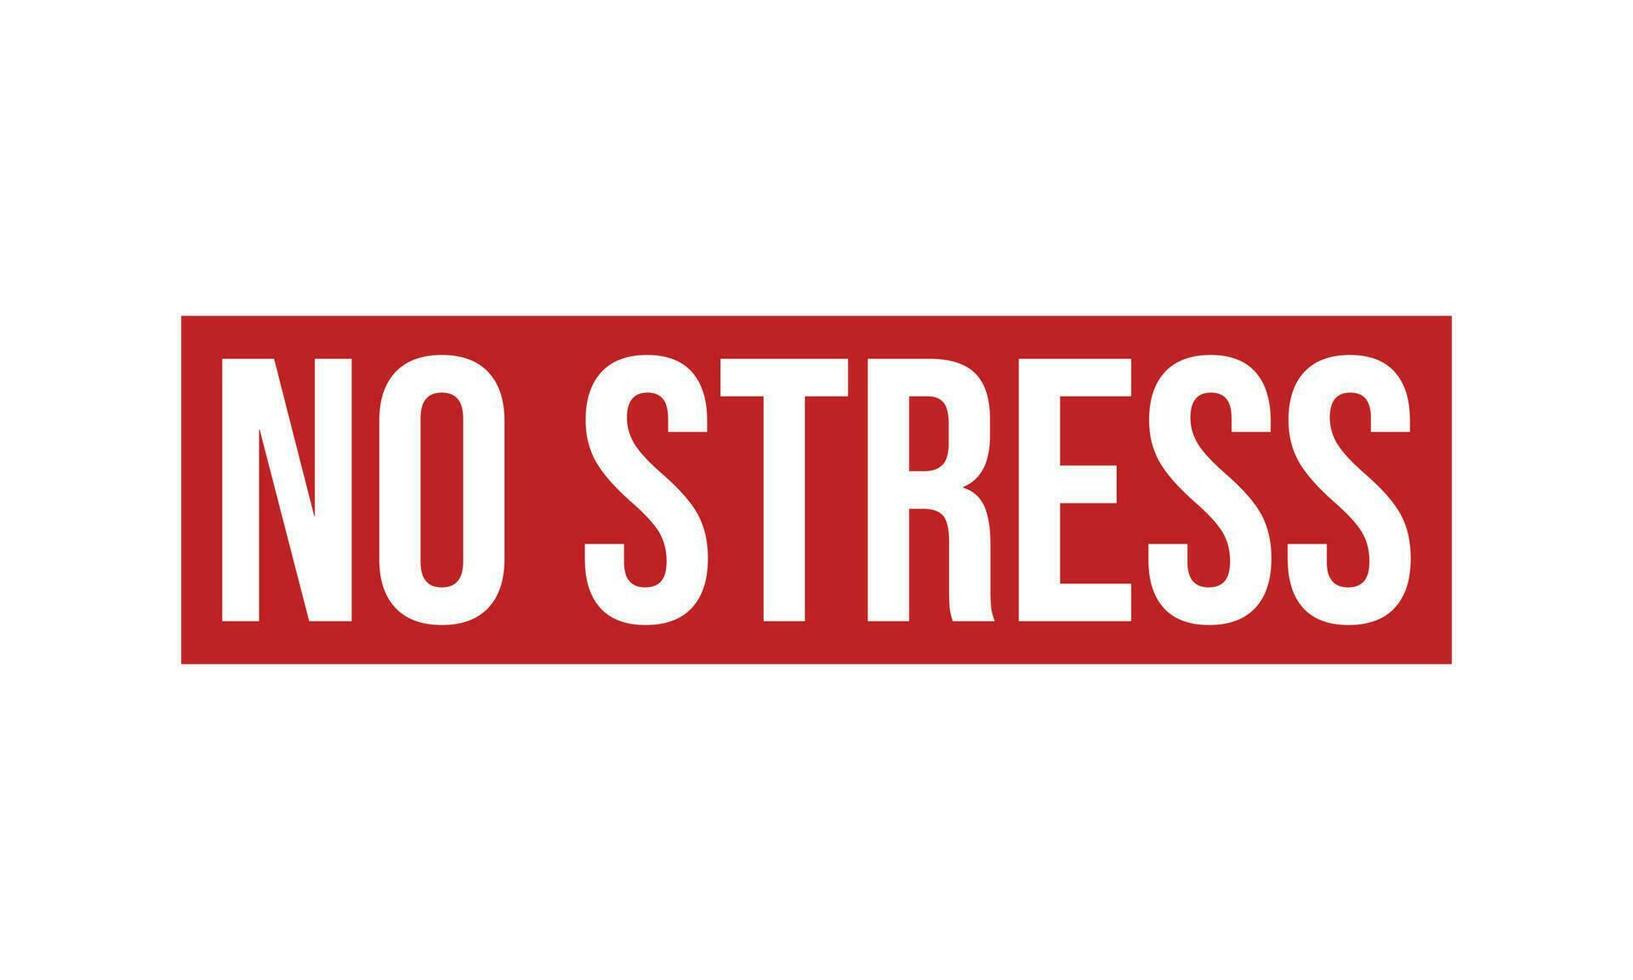 No Stress Rubber Stamp Seal Vector